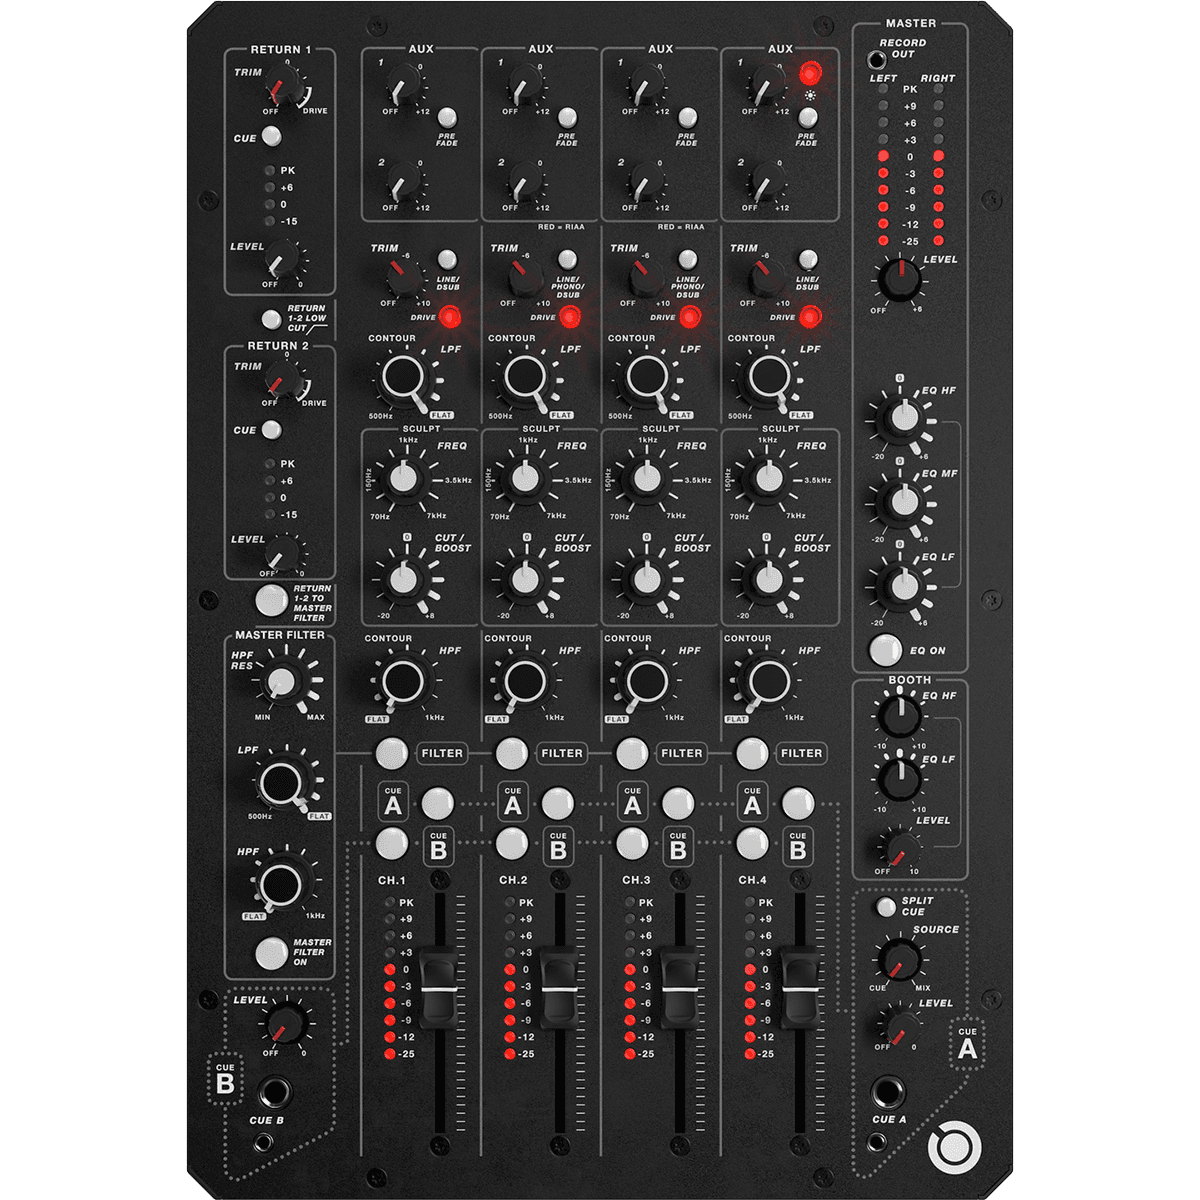 Tables de mixage DJ - Playdifferently - MODEL 1.4